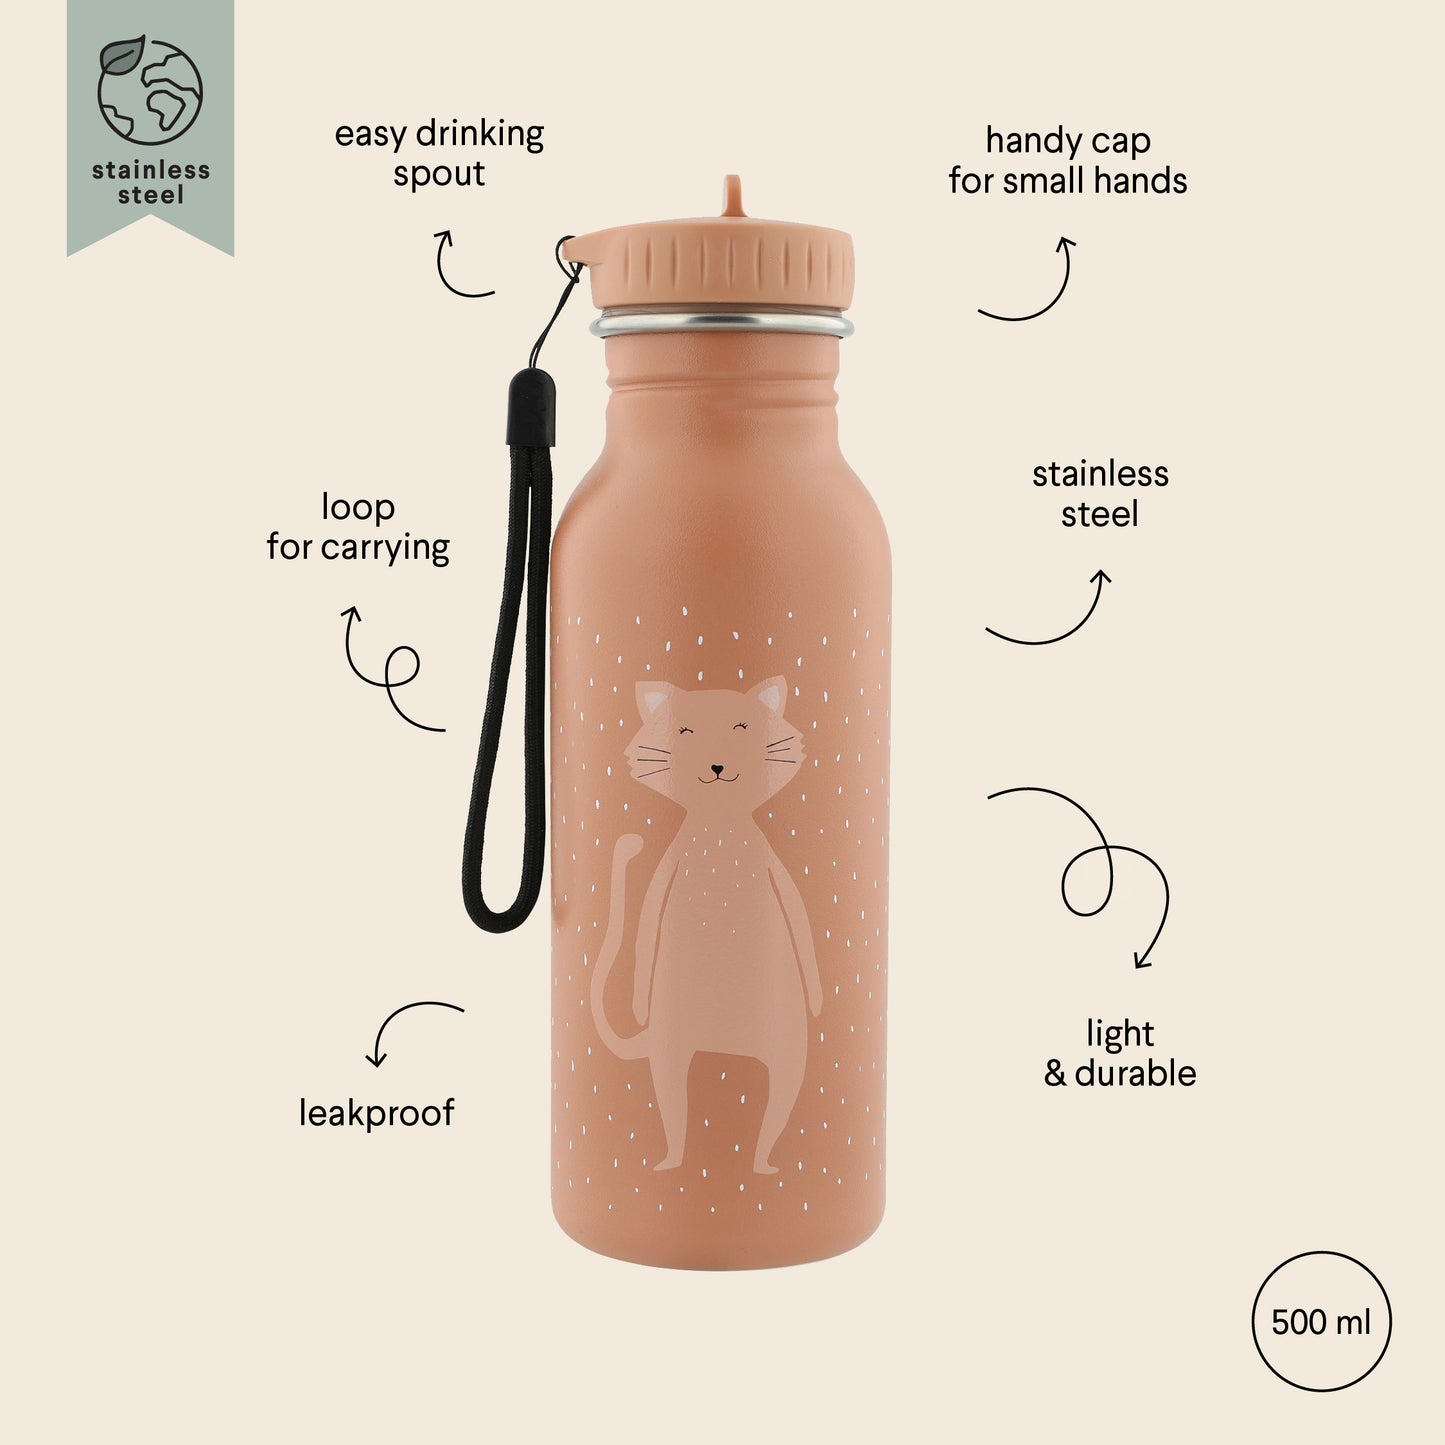 Stainless Steel Bottle 500 ml featuring Mrs Cat design, perfect for kids on-the-go. Durable stainless steel construction, leak-proof, with easy-to-open cap and convenient carrying loop. Dimensions: 20 cm x 6.5 cm.